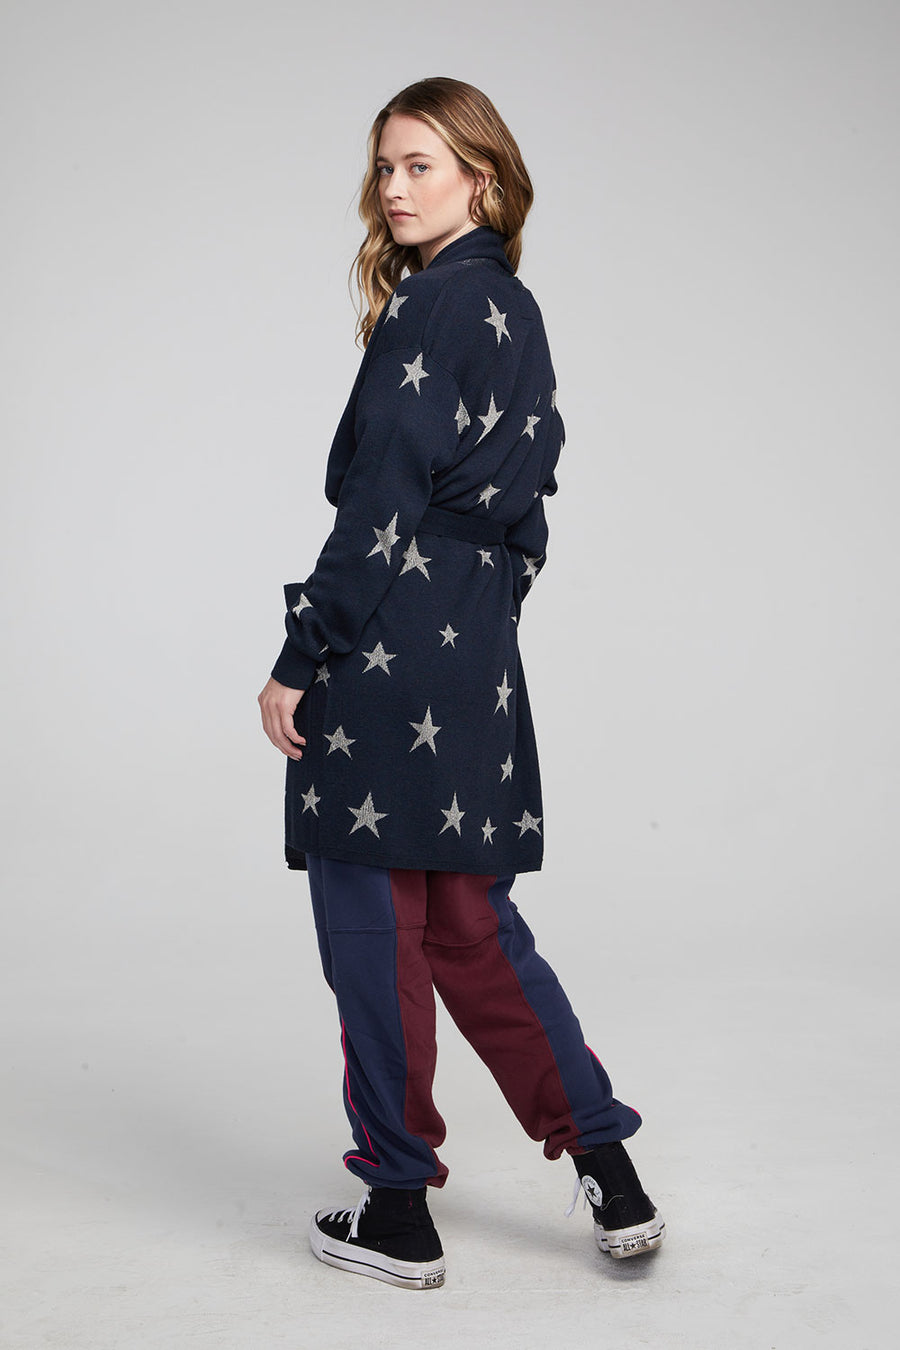 Eve Star Struck Sweater WOMENS chaserbrand